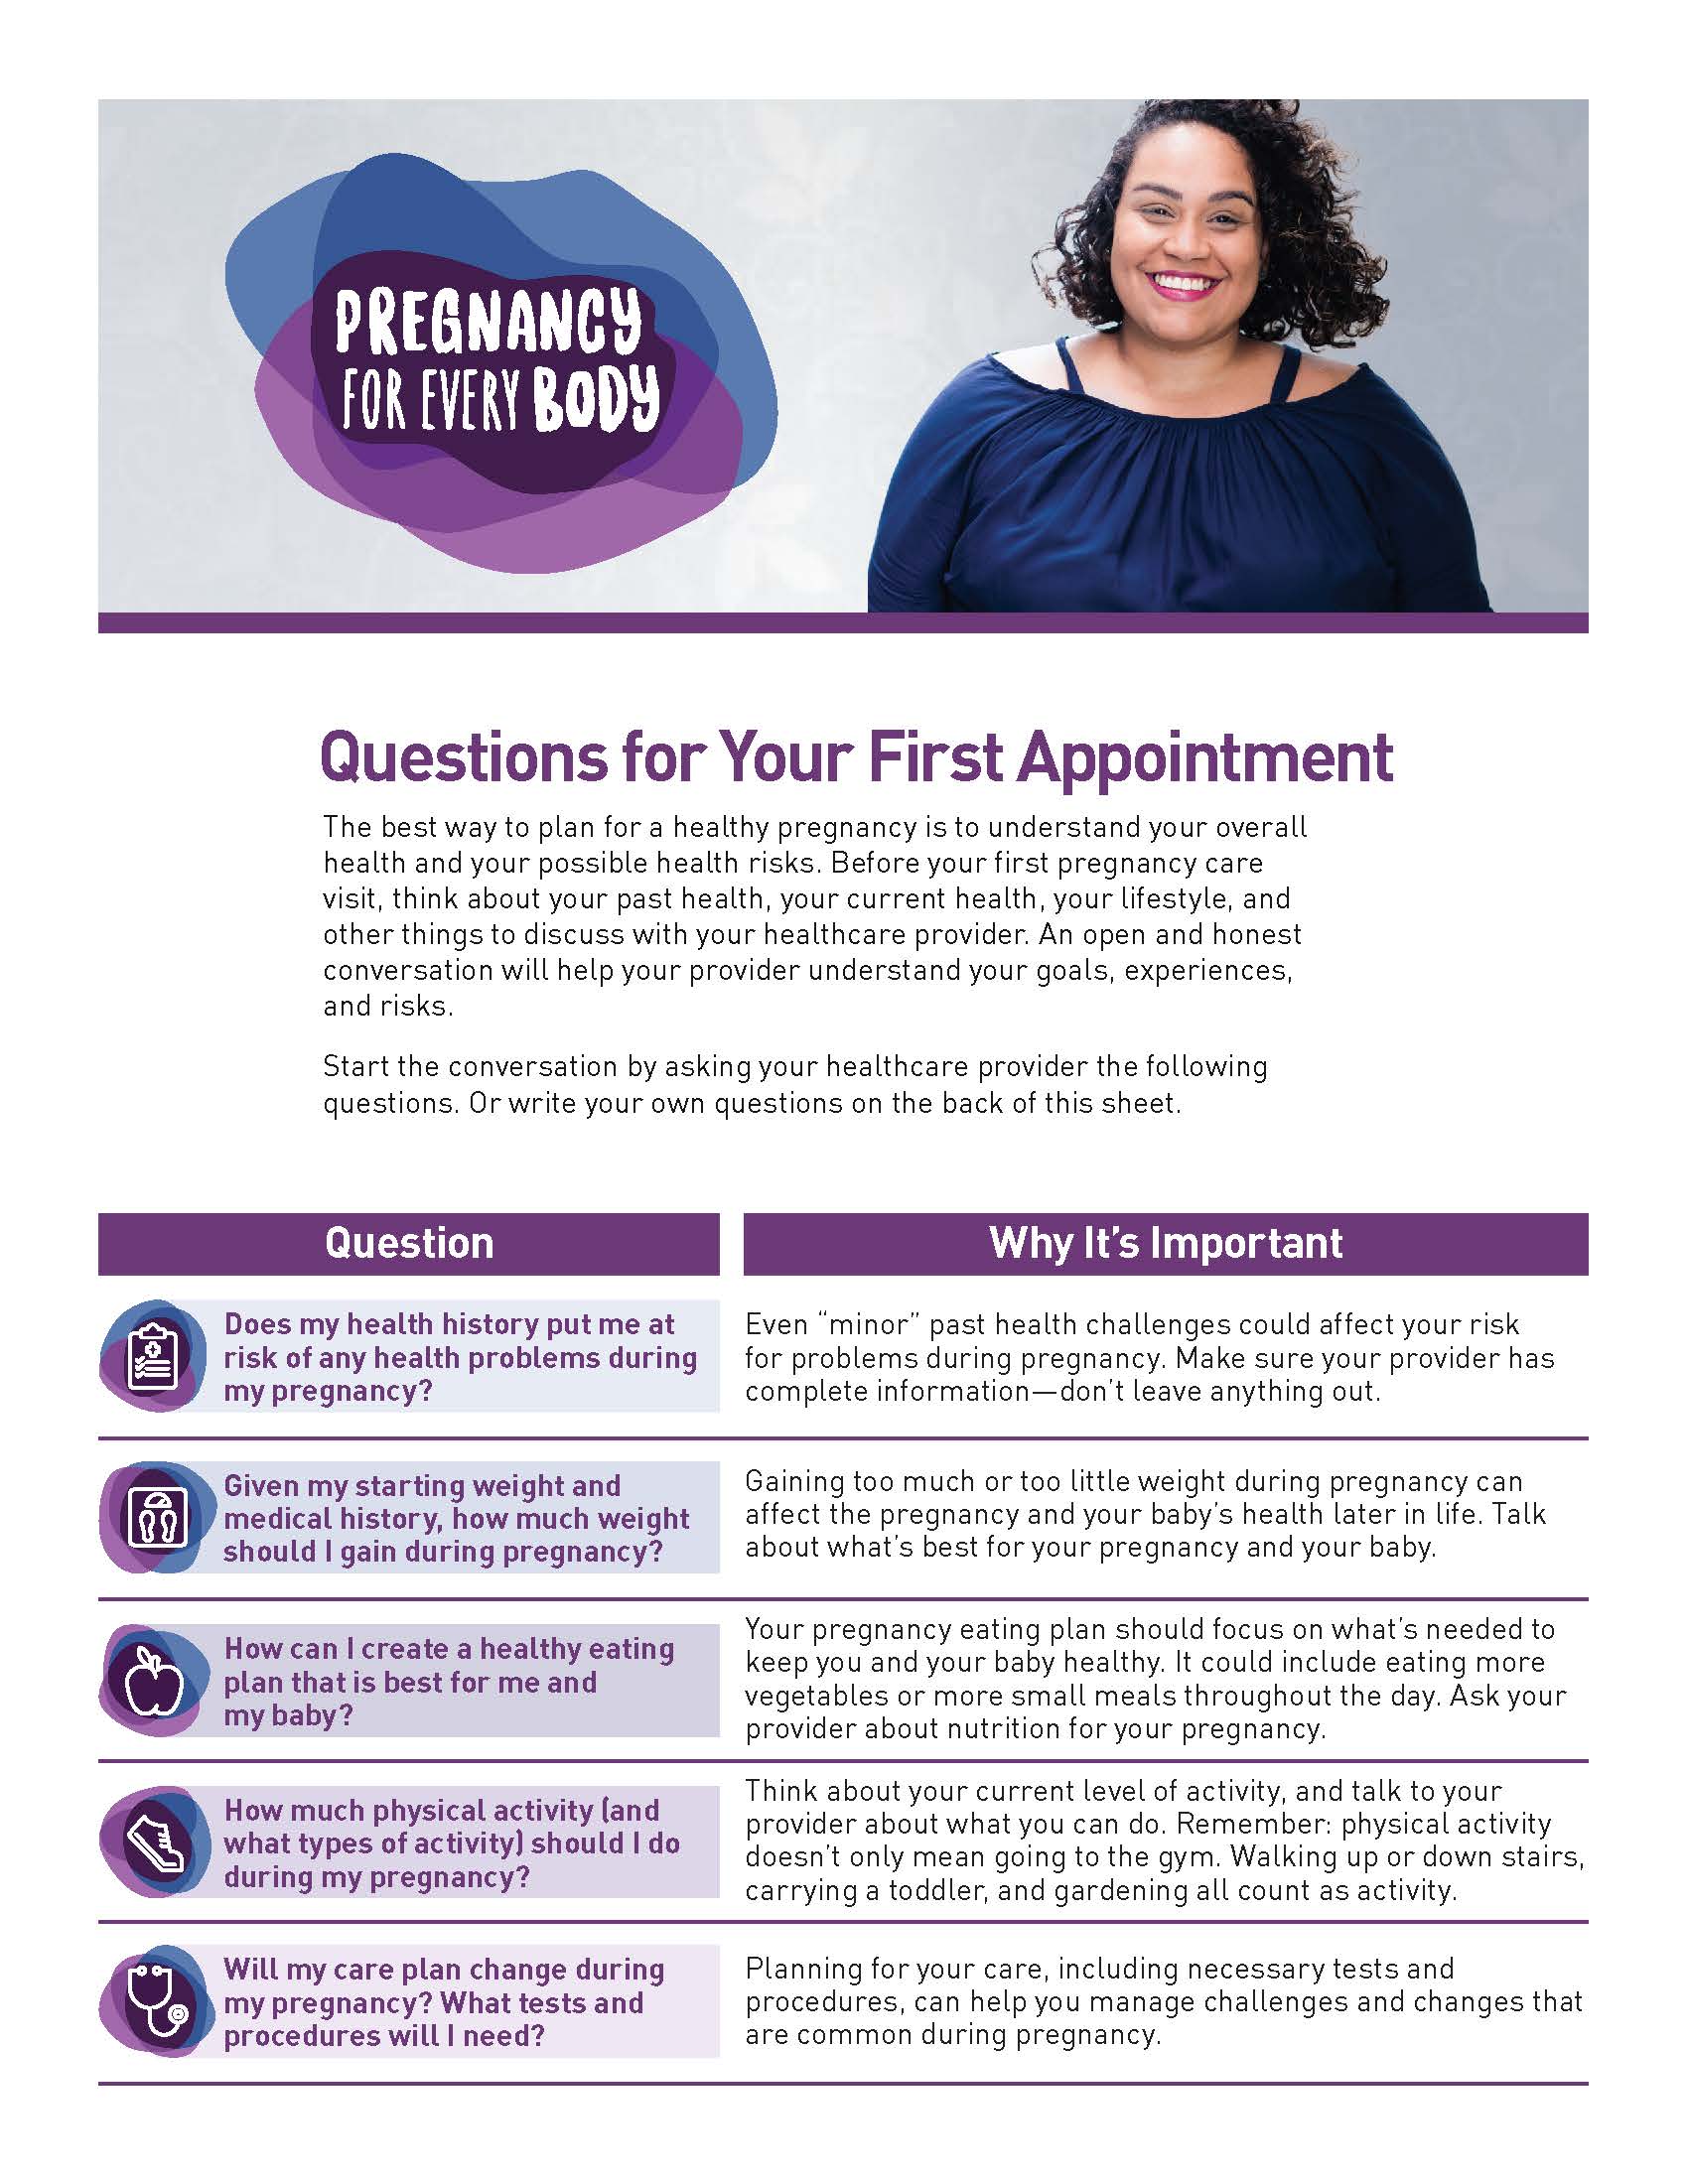 Image of the Pregnancy for Every Body Factsheet: Questions for Your First Appointment.